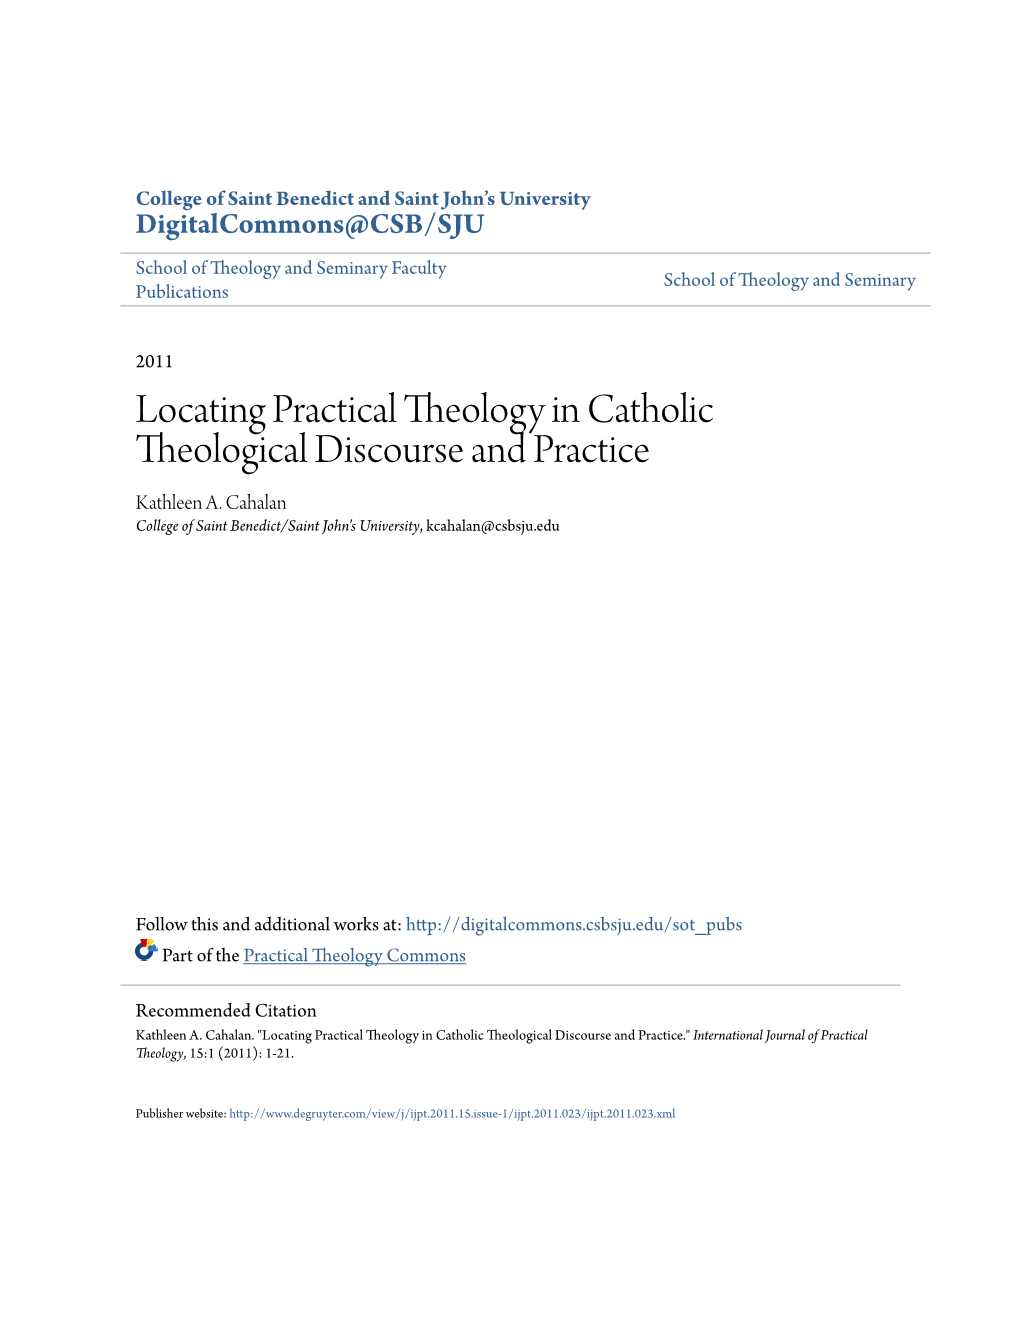 Locating Practical Theology in Catholic Theological Discourse and Practice Kathleen A